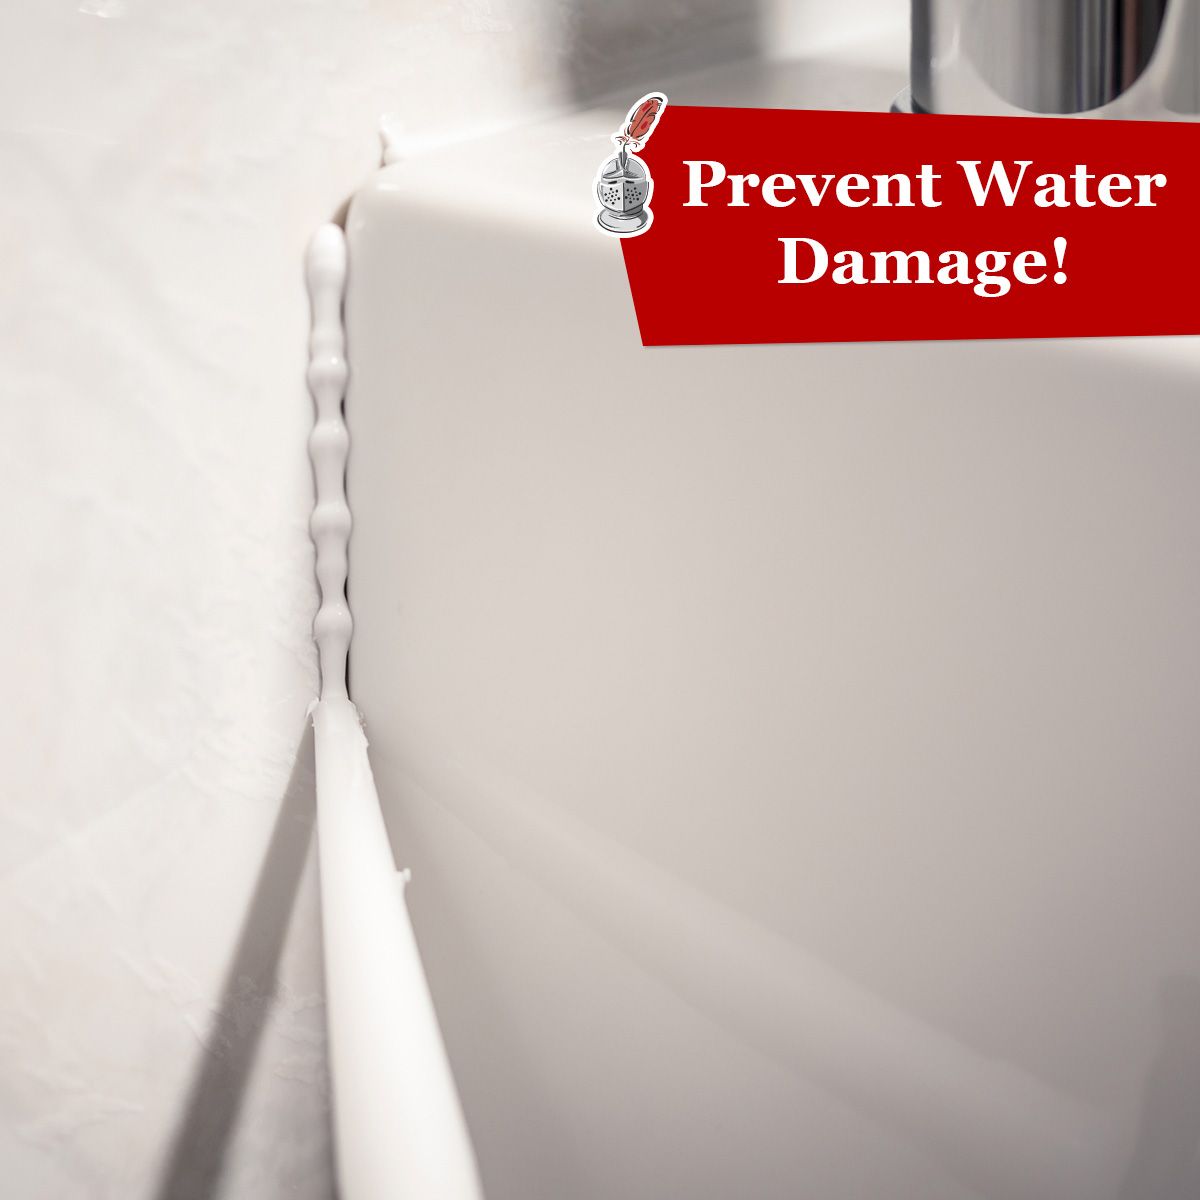 Prevent Water Damage!